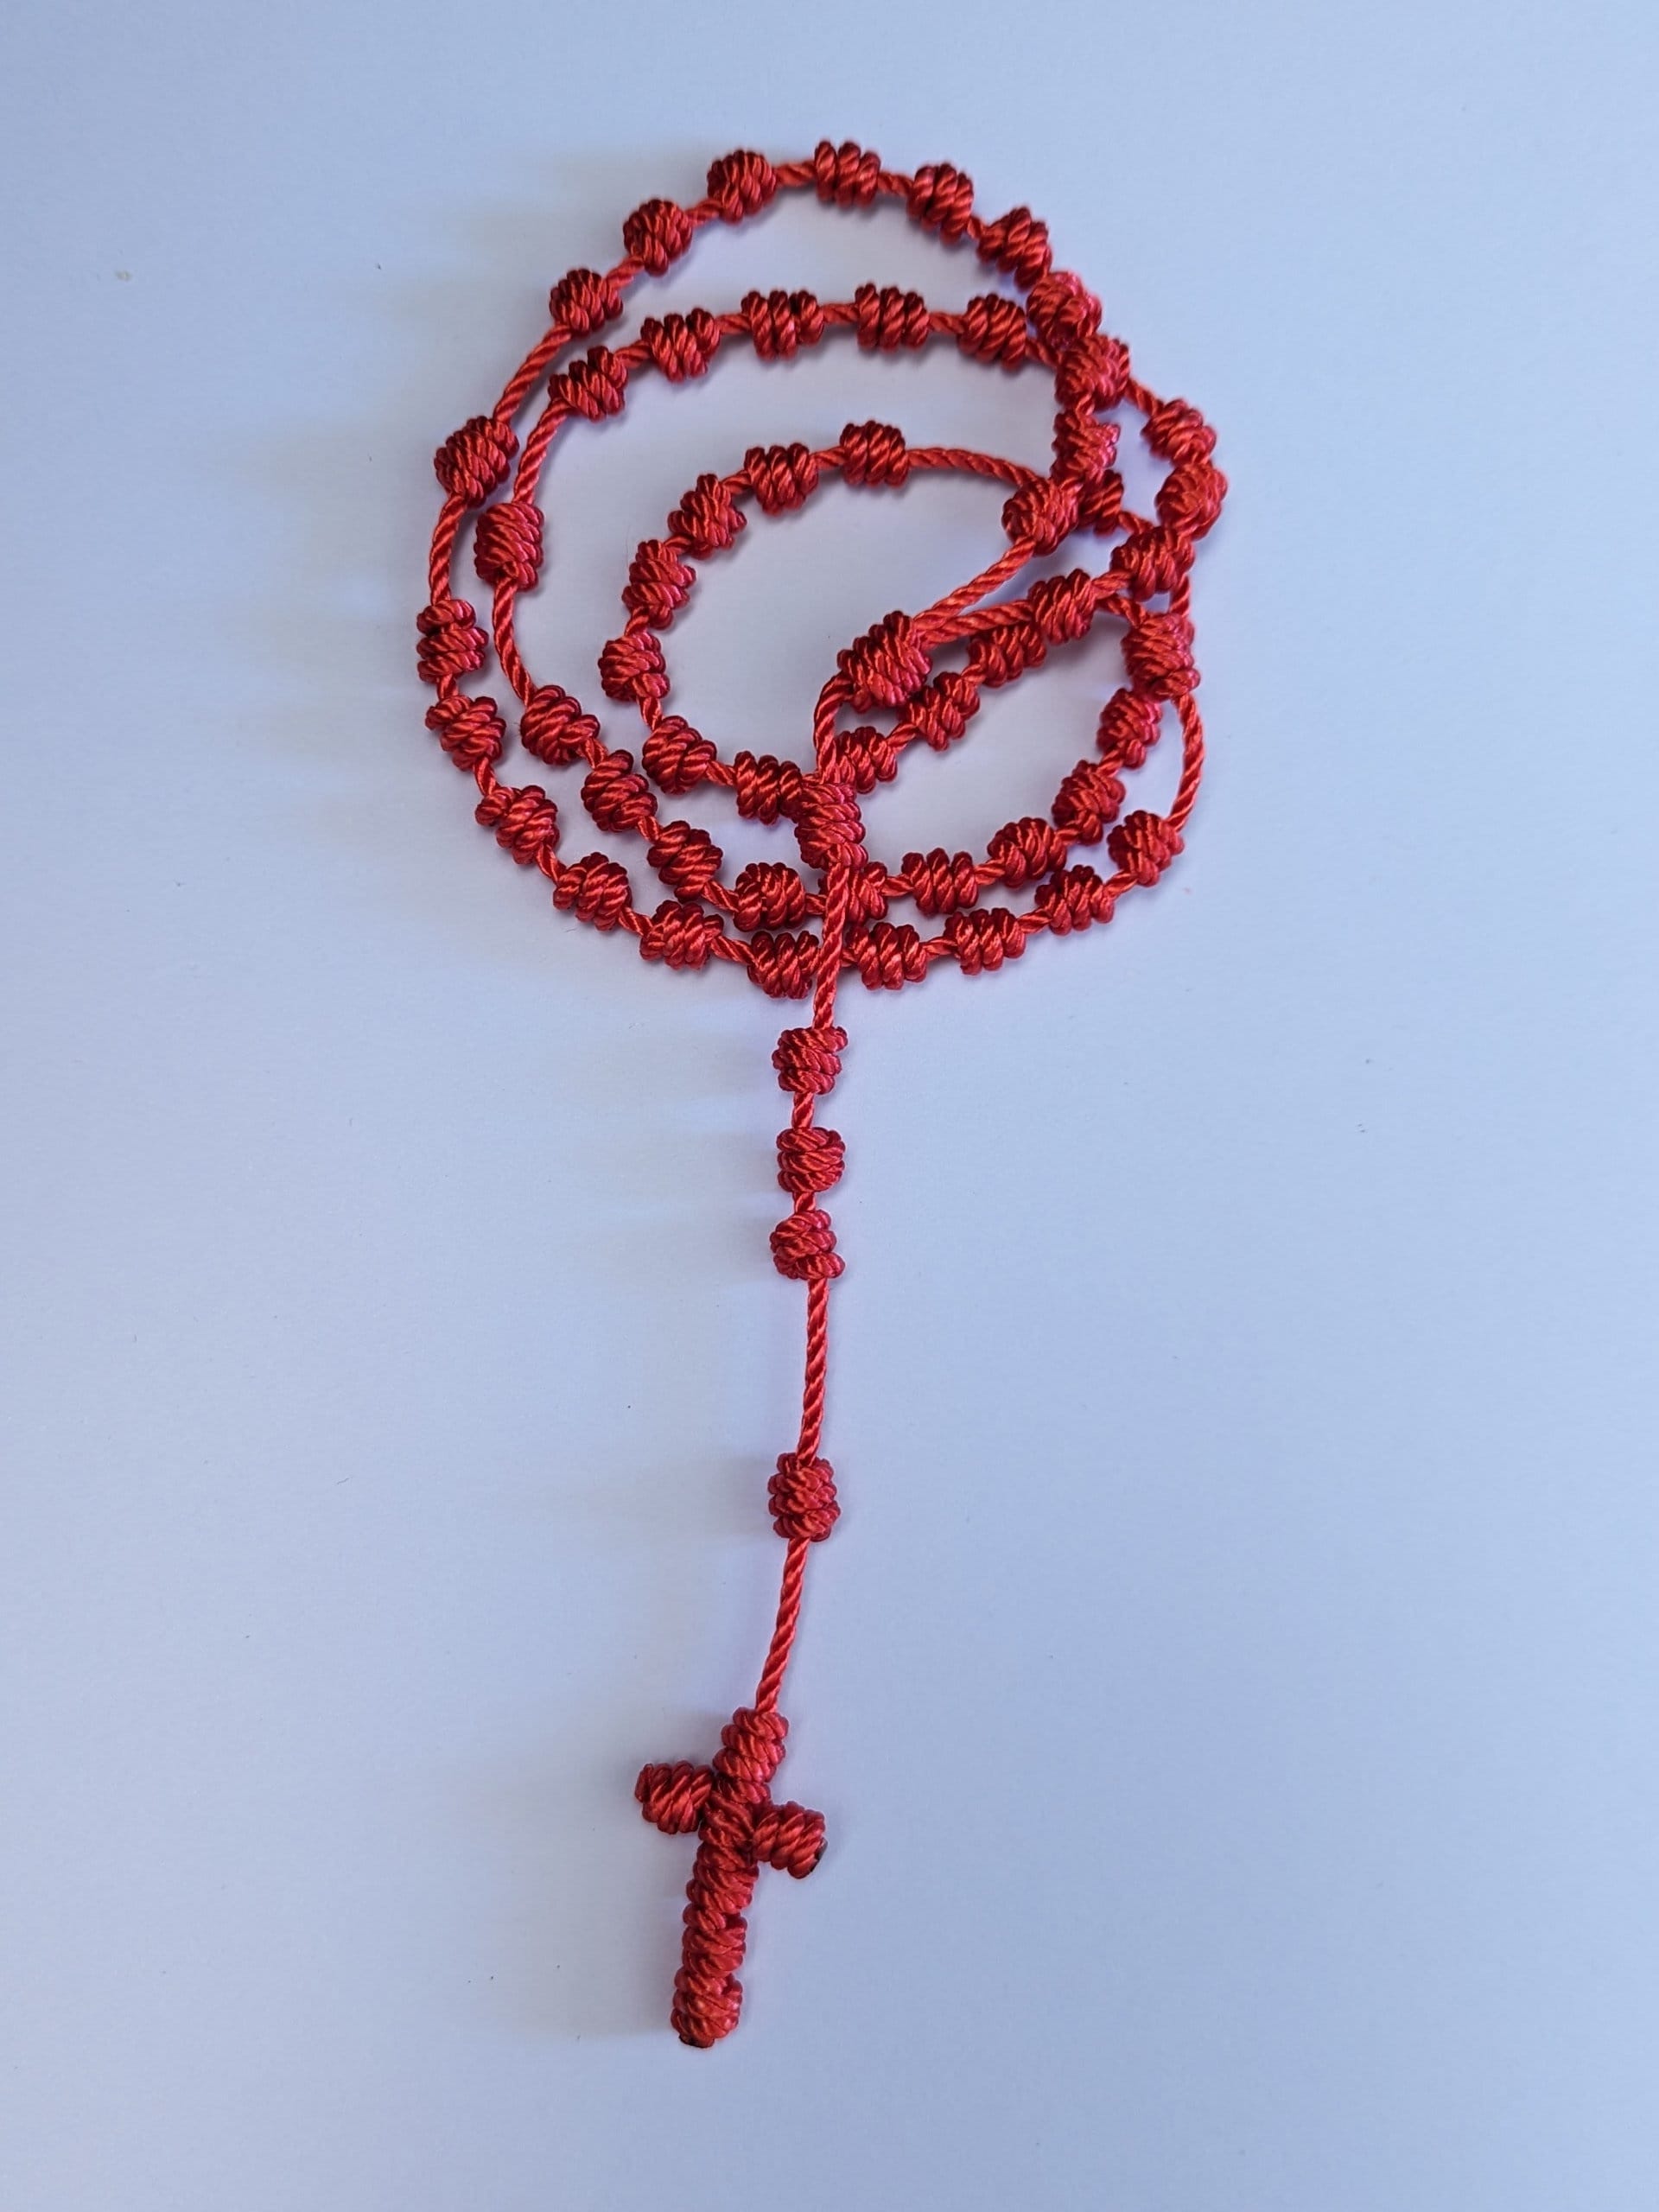  Twine by Design #36 3-Strand Twisted Rosary Twine